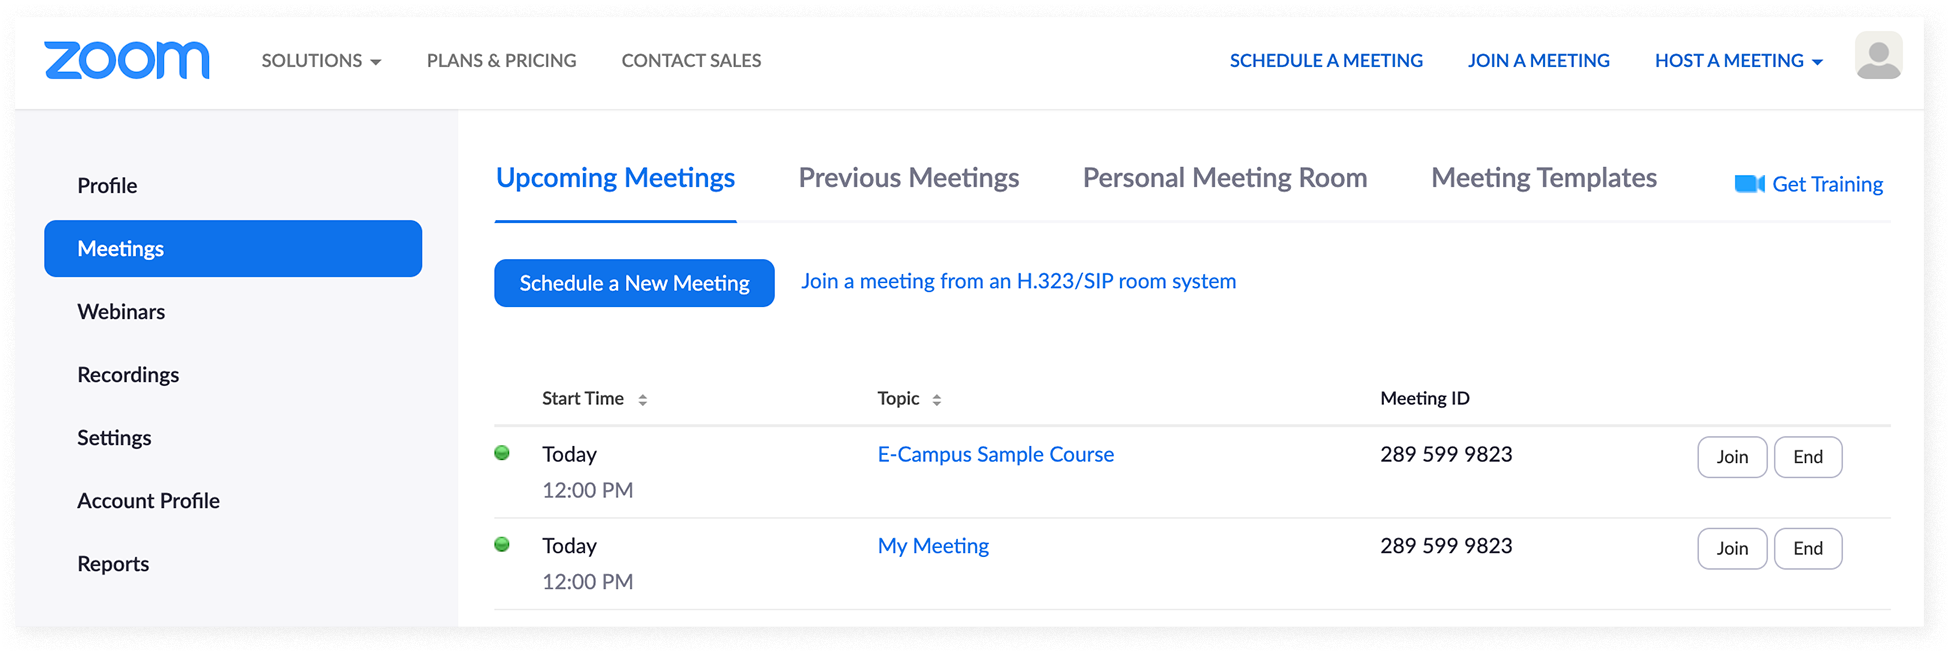 The Meetings page on the Zoom website